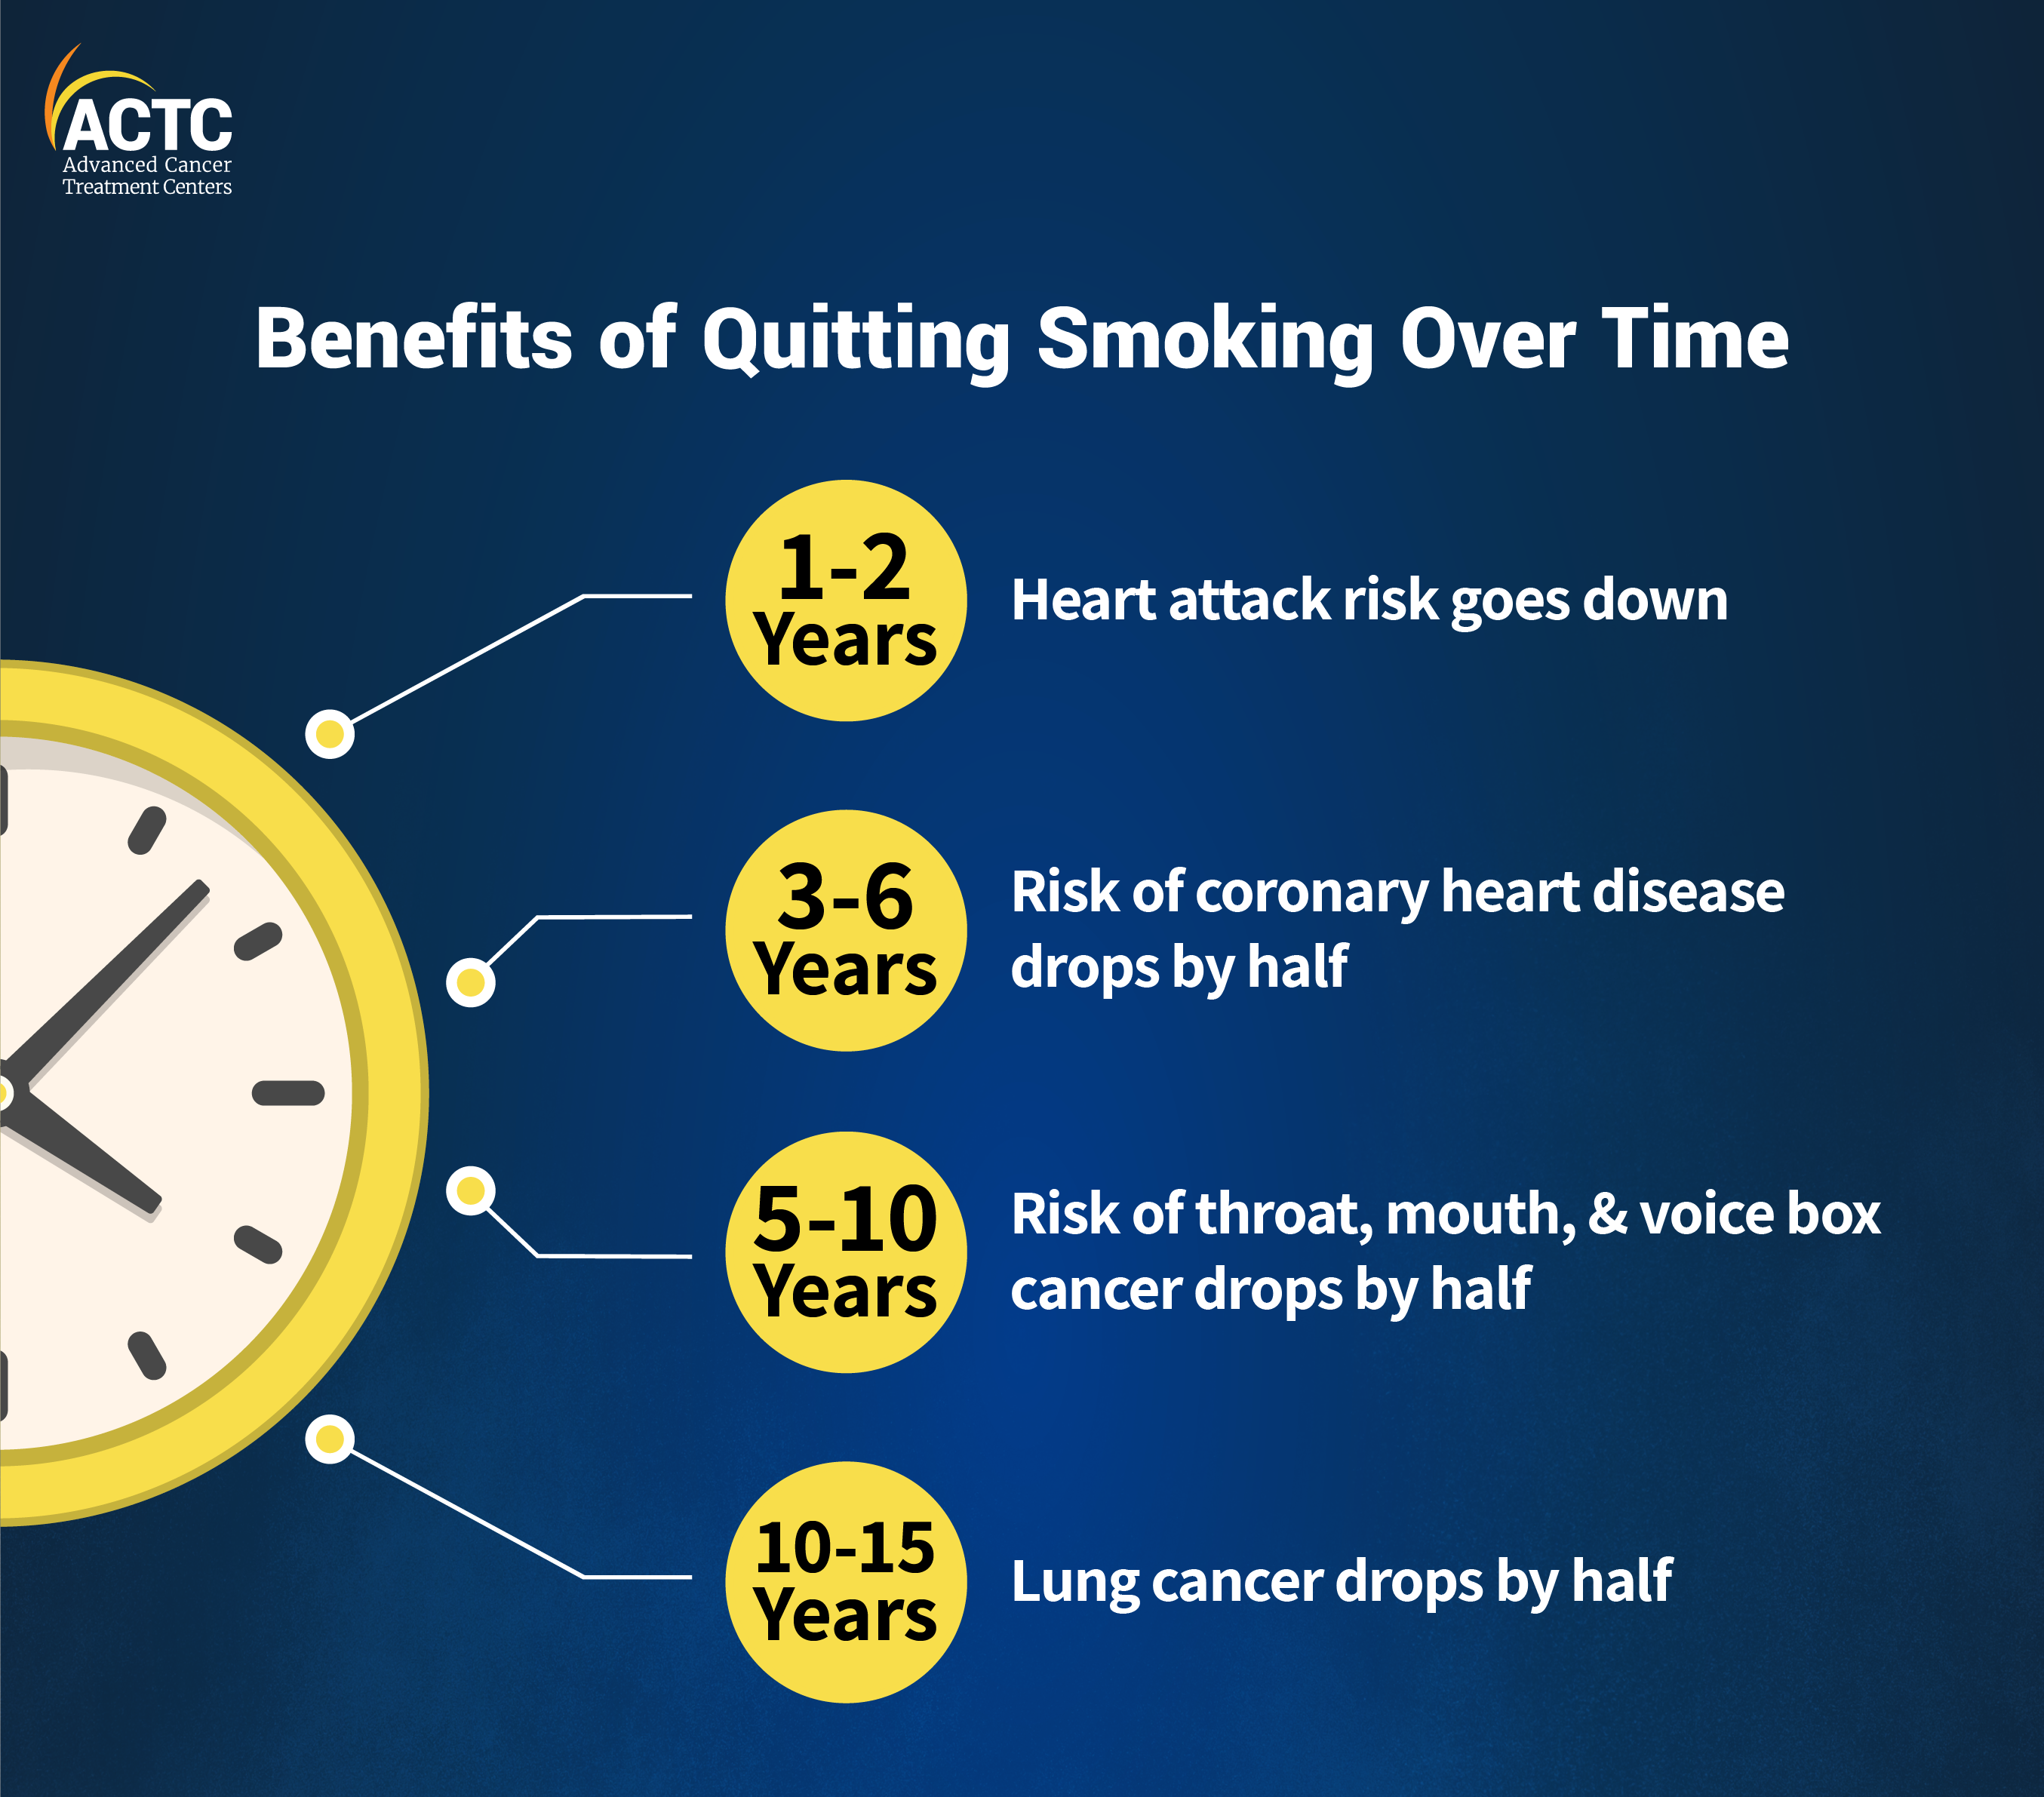 Health Gains From Quitting Smoking Over Time